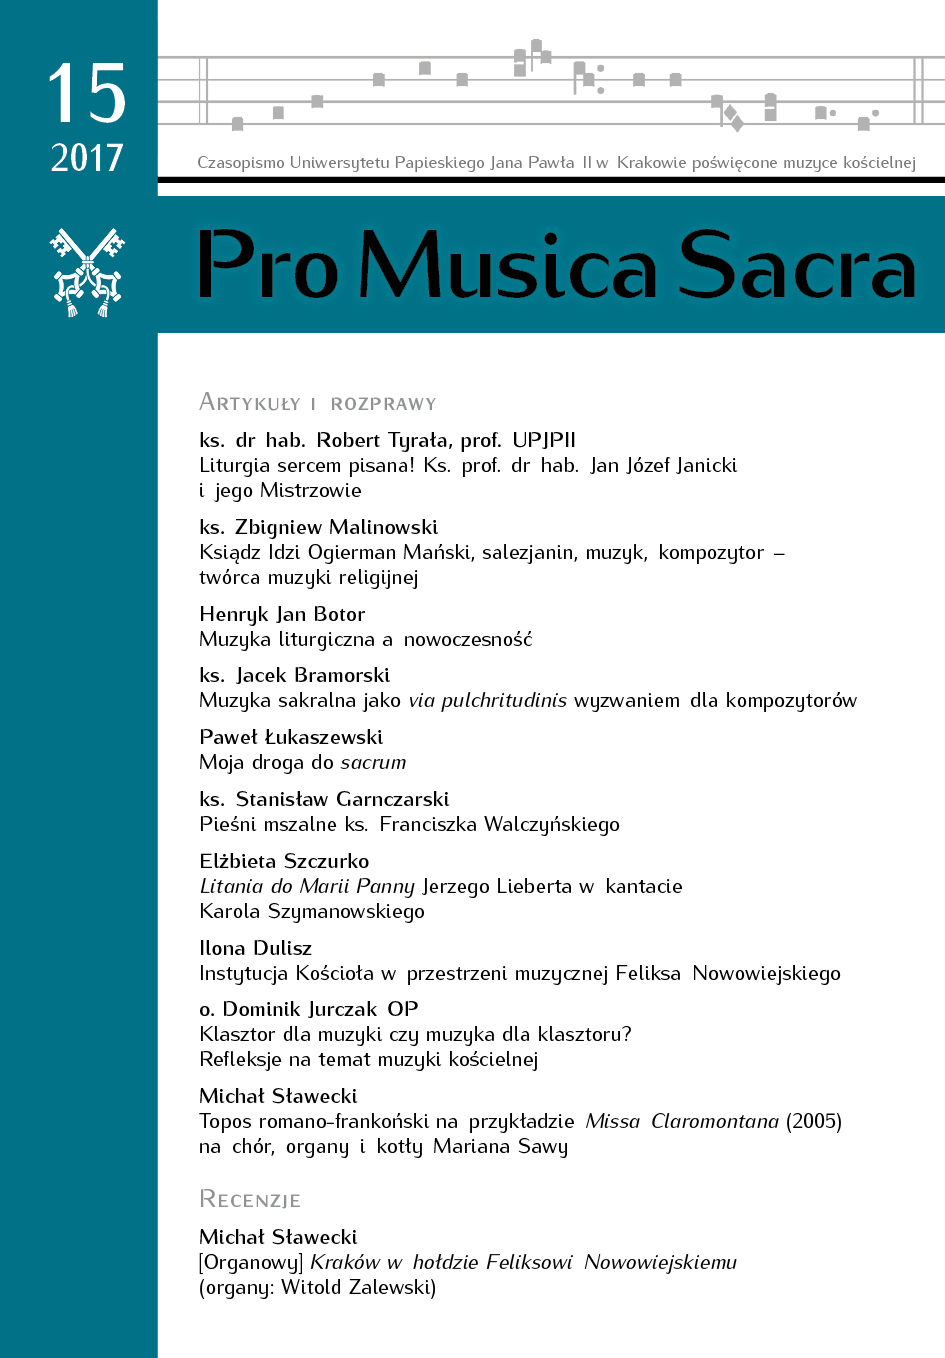 A monastery for music, or music for a monastery? Reflection on liturgical music Cover Image